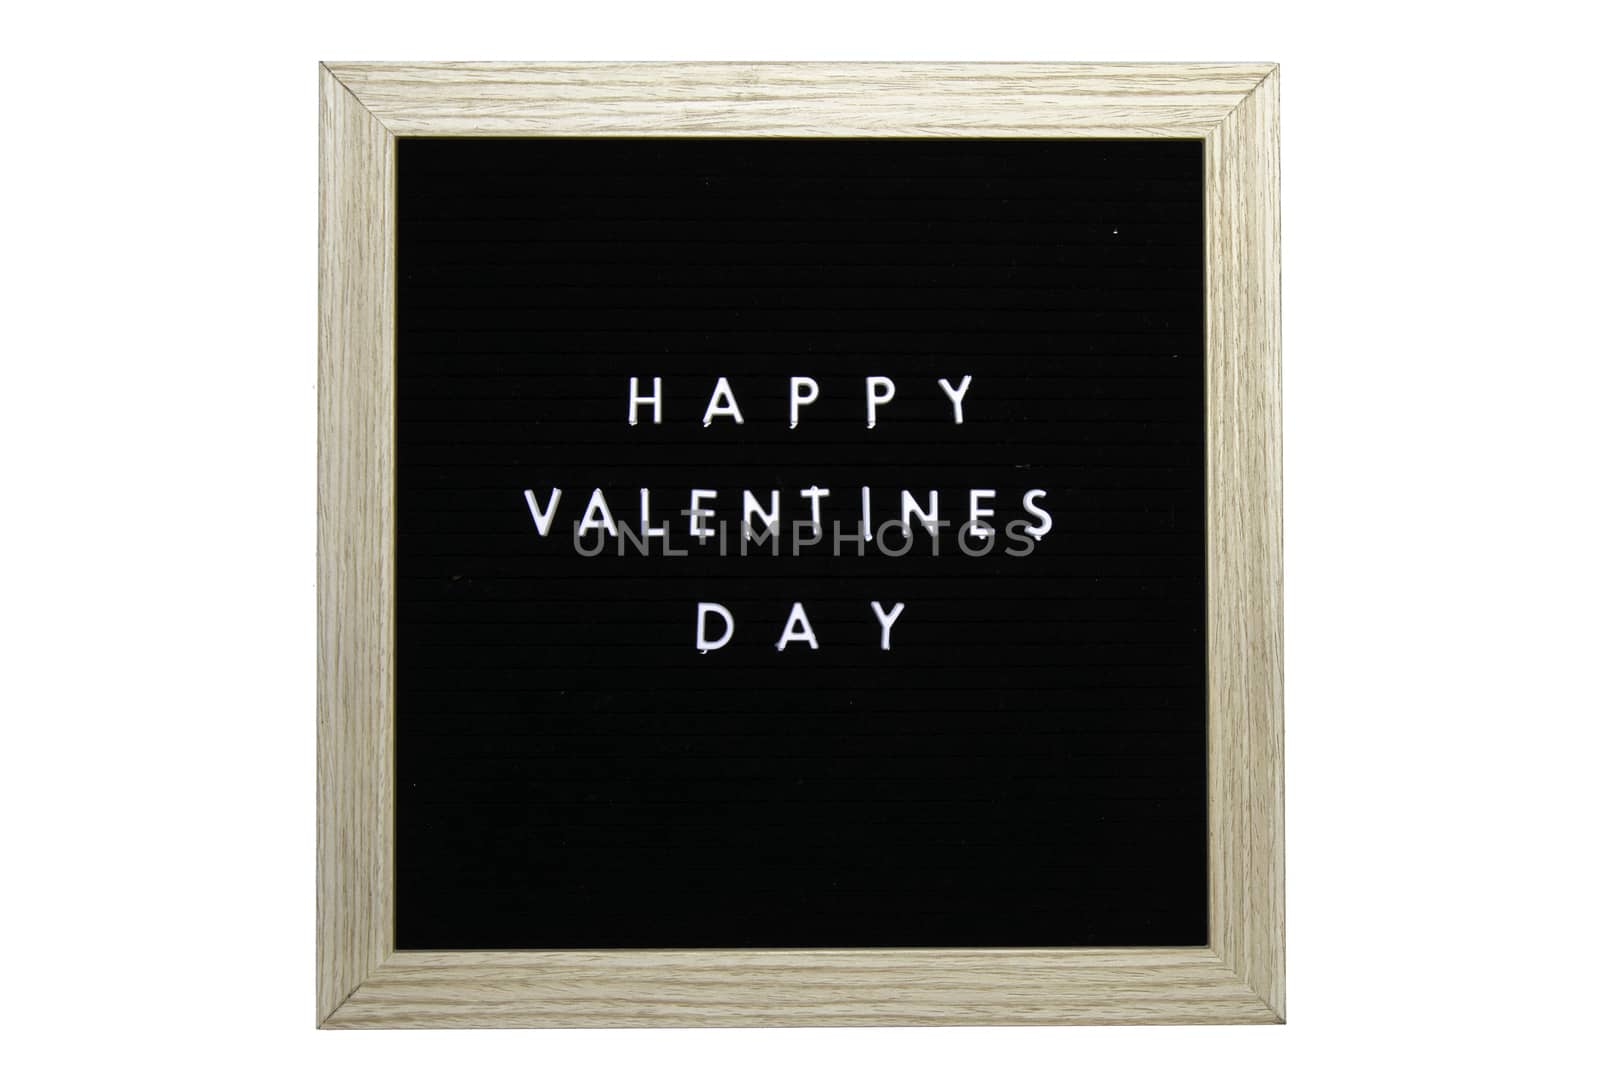 A Black Sign With a Birch Frame That Says Happy Valentines Day in White Letters on a Pure White Background